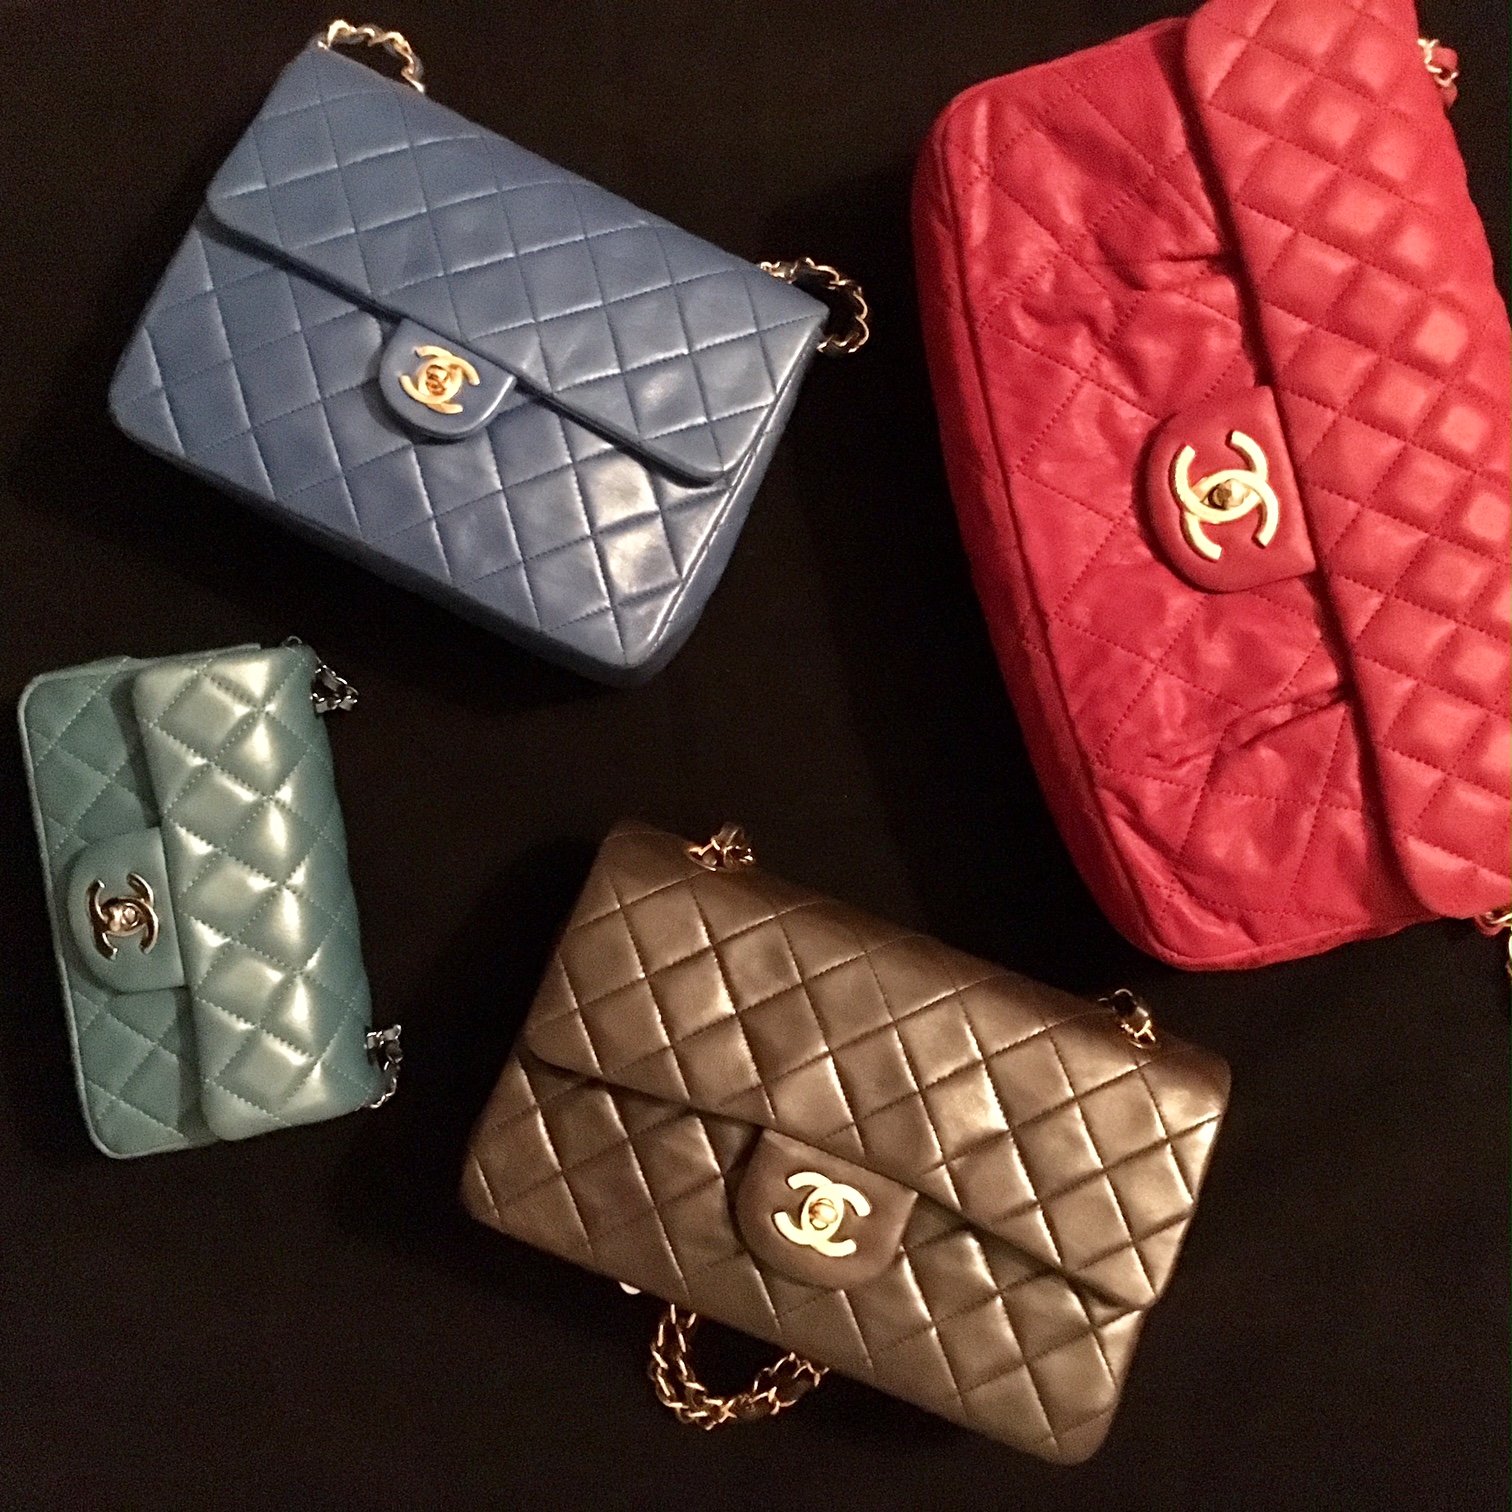 sell chanel bags